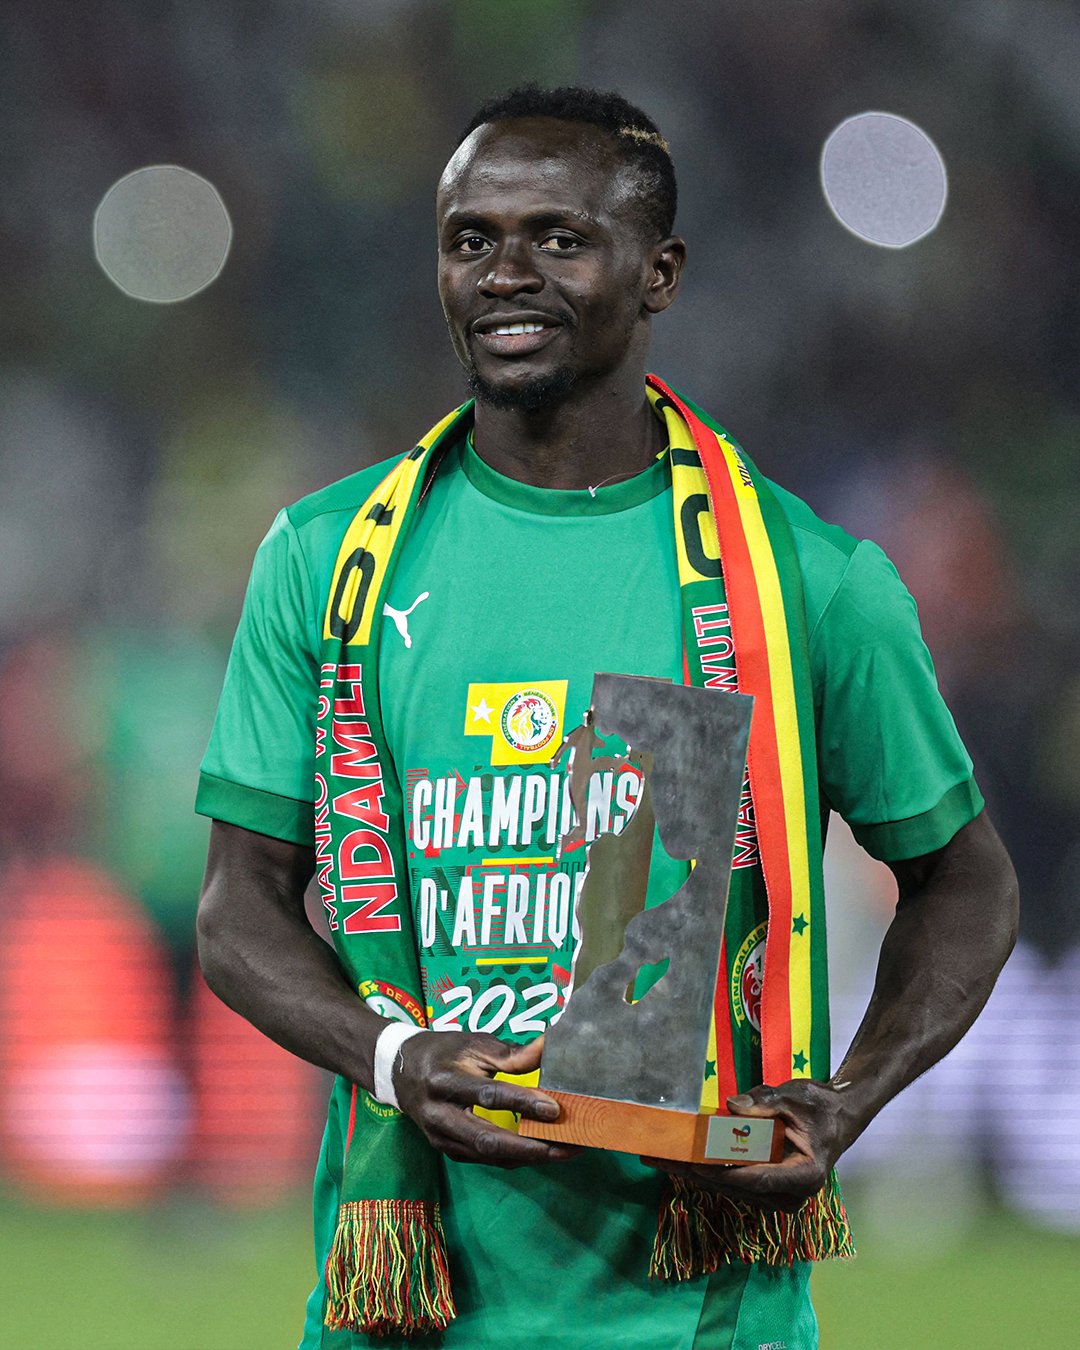 Its the best day of my life and the best trophy of my life, reveals Sadio Mane